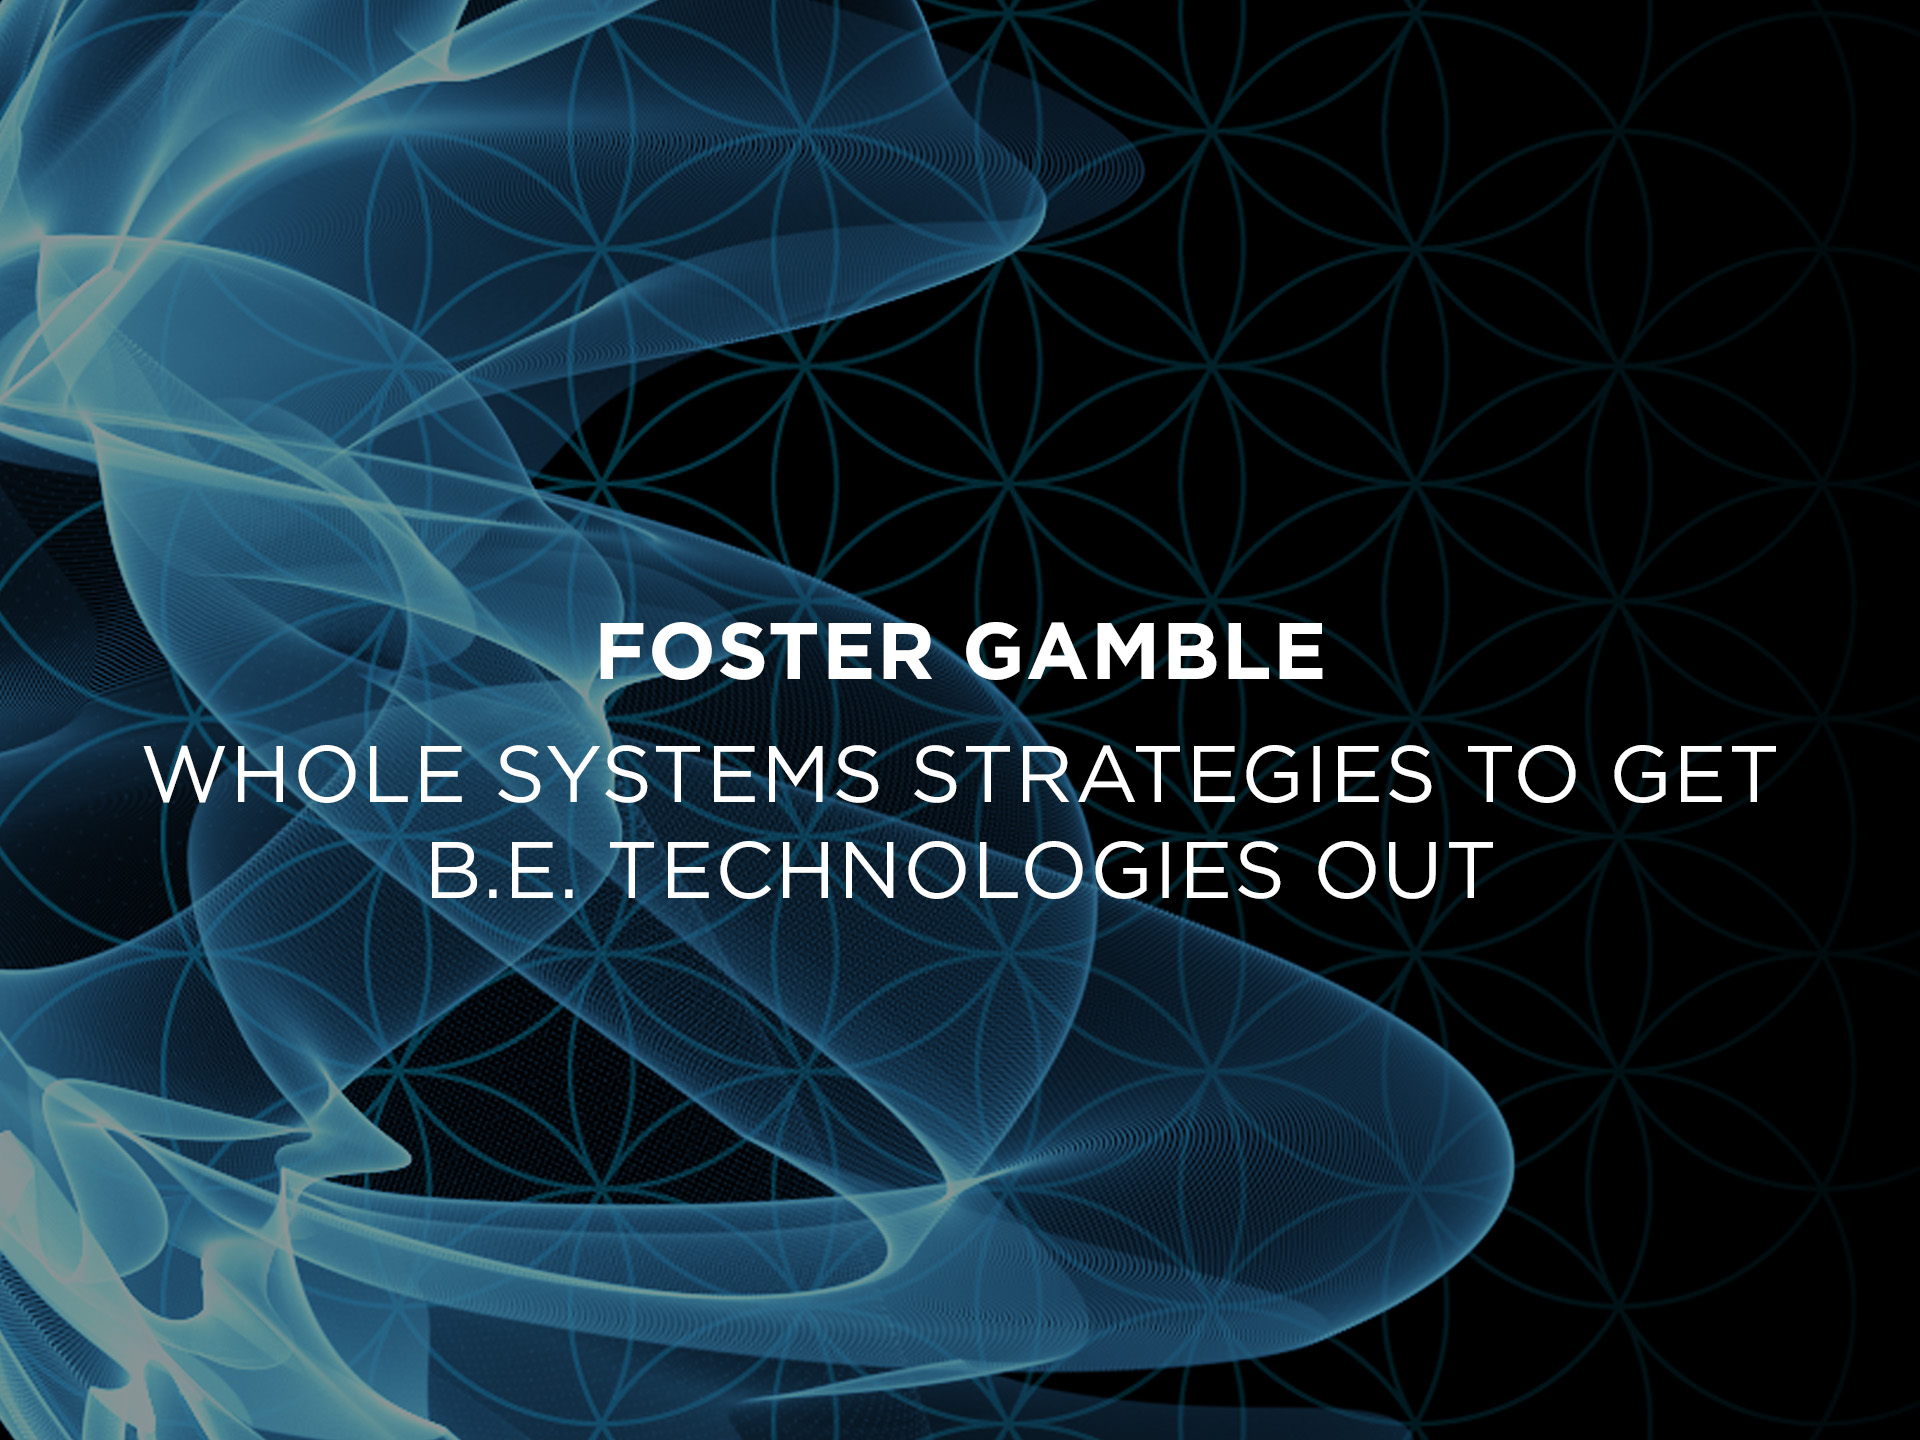 Foster Gamble : Whole Systems Strategies for Getting Breakthrough Technologies Safely and Successfully out to the World